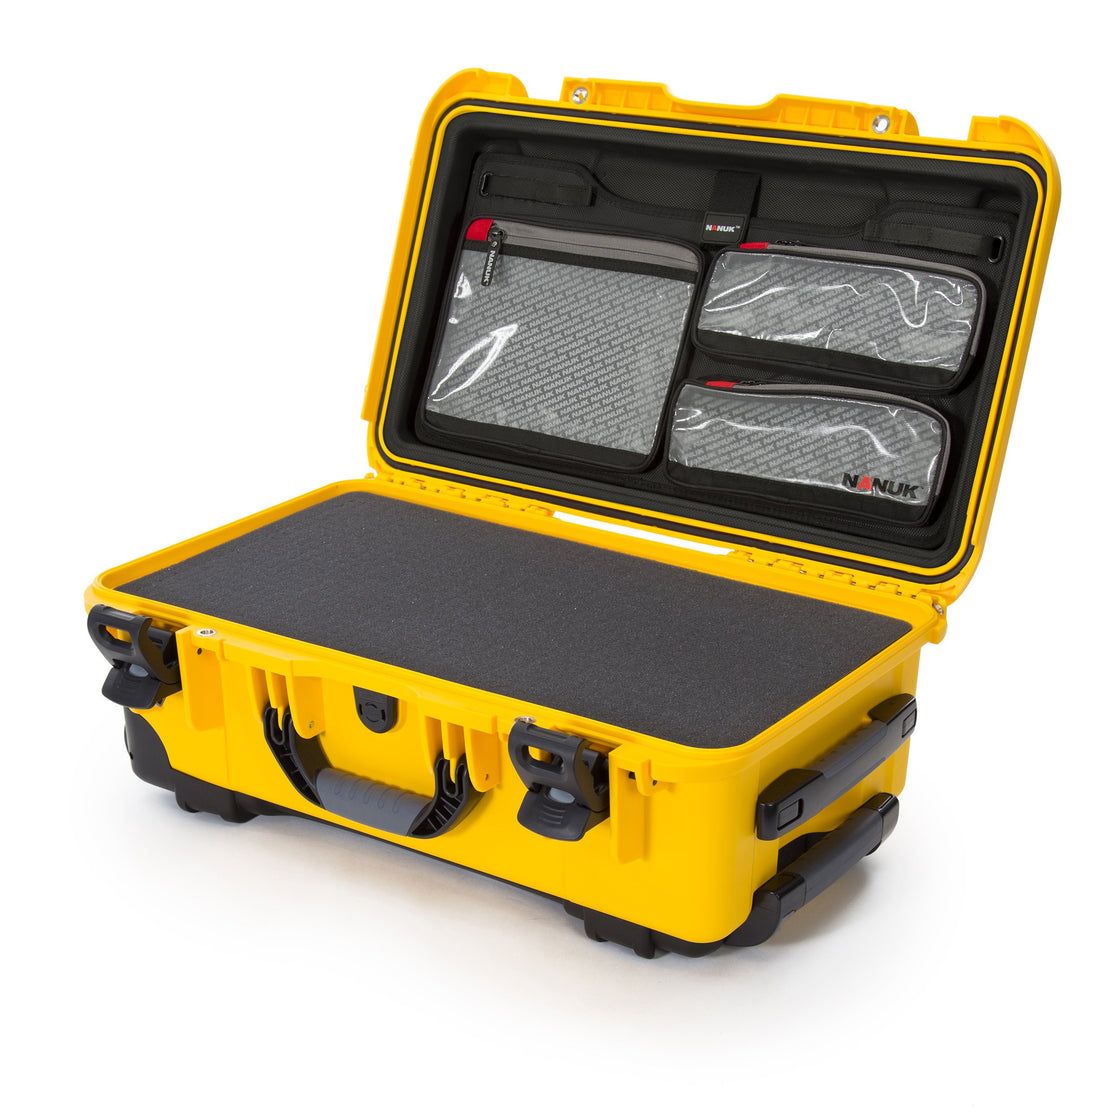 nanuk 935 protective travel case for 3 bottles of wine w wheels and extendable handle tsa approved yellow